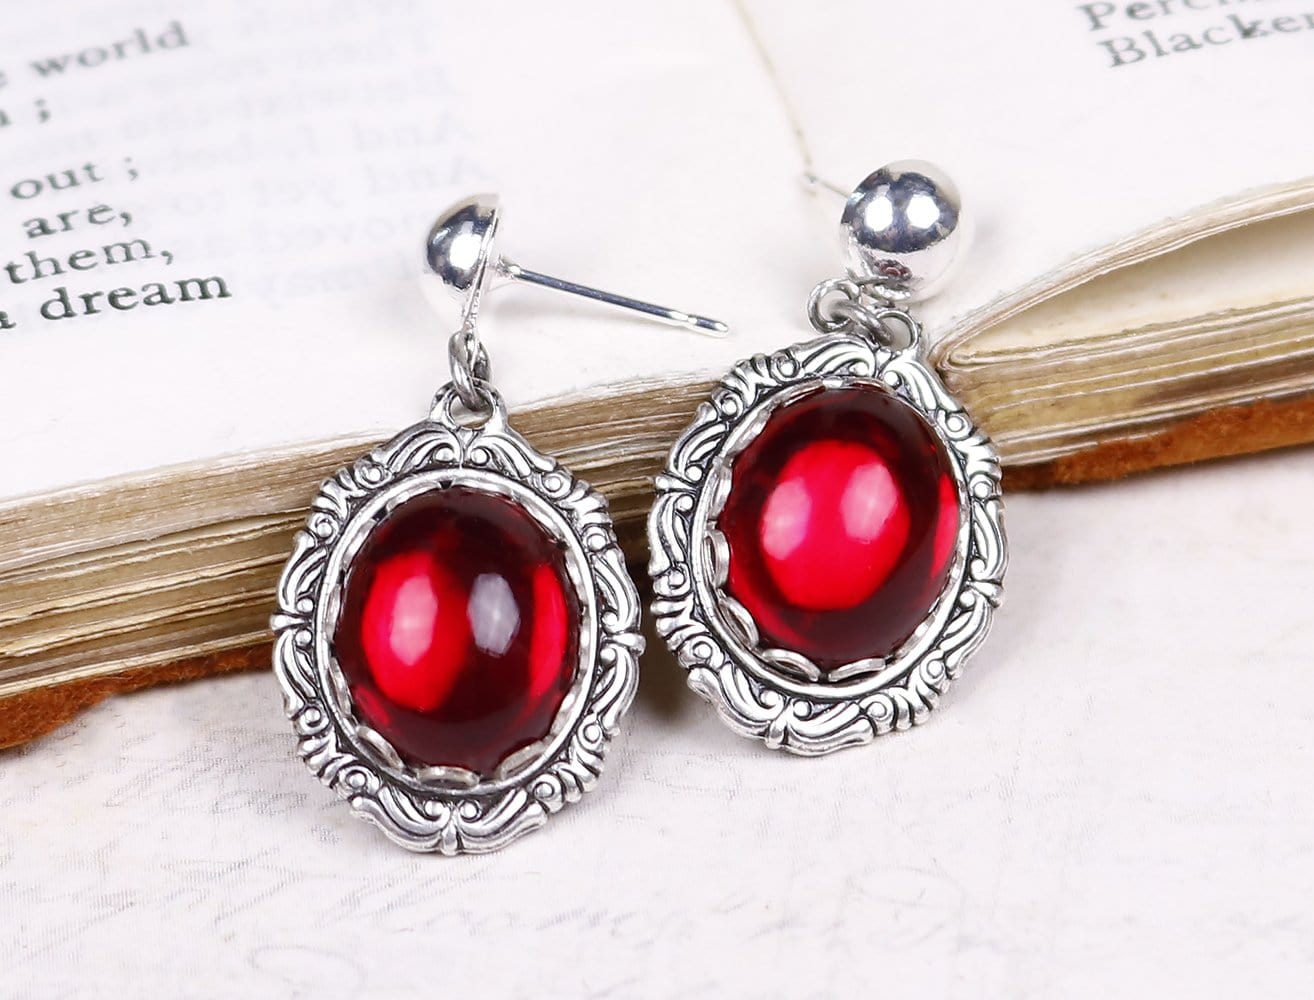 Perceval Earrings in Ruby - Antiqued Silver by dosha of Rabbitwood & Reason